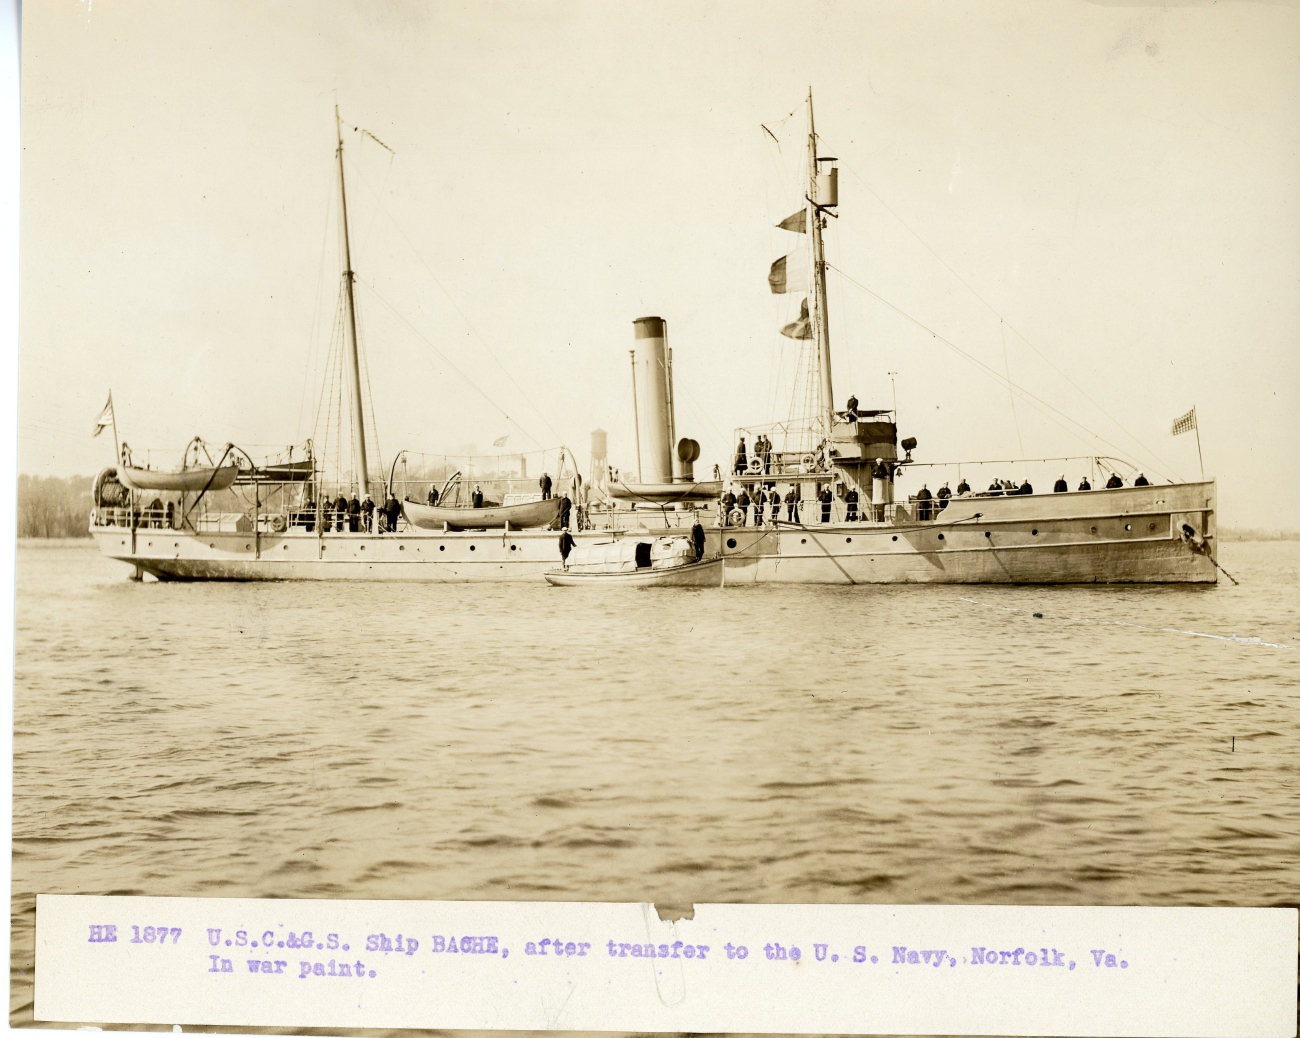 The second C&GS; Ship BACHE during time transferred to Navy duringWorld War I